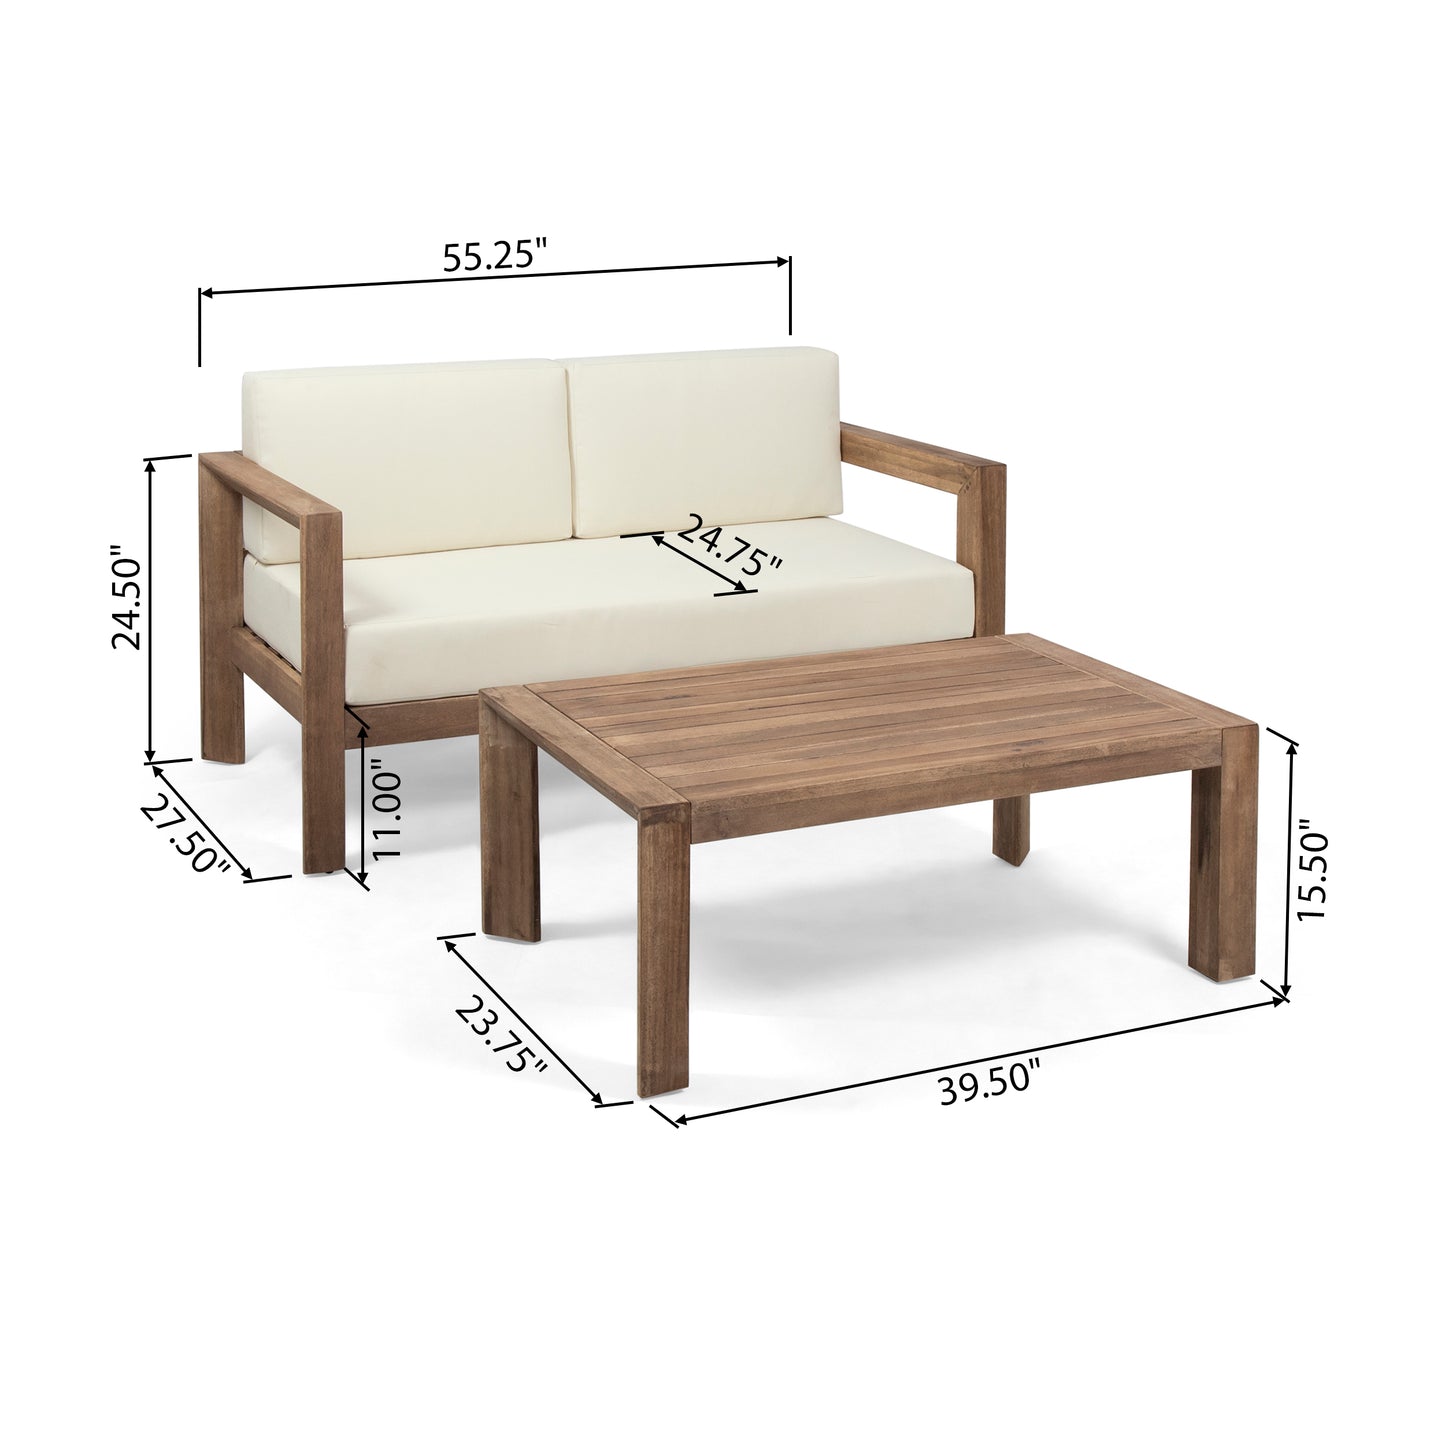 Lucia Outdoor 2 Seater Wooden Loveseat and Coffee Table Chat Set with Cushions, Beige and Brown Finish